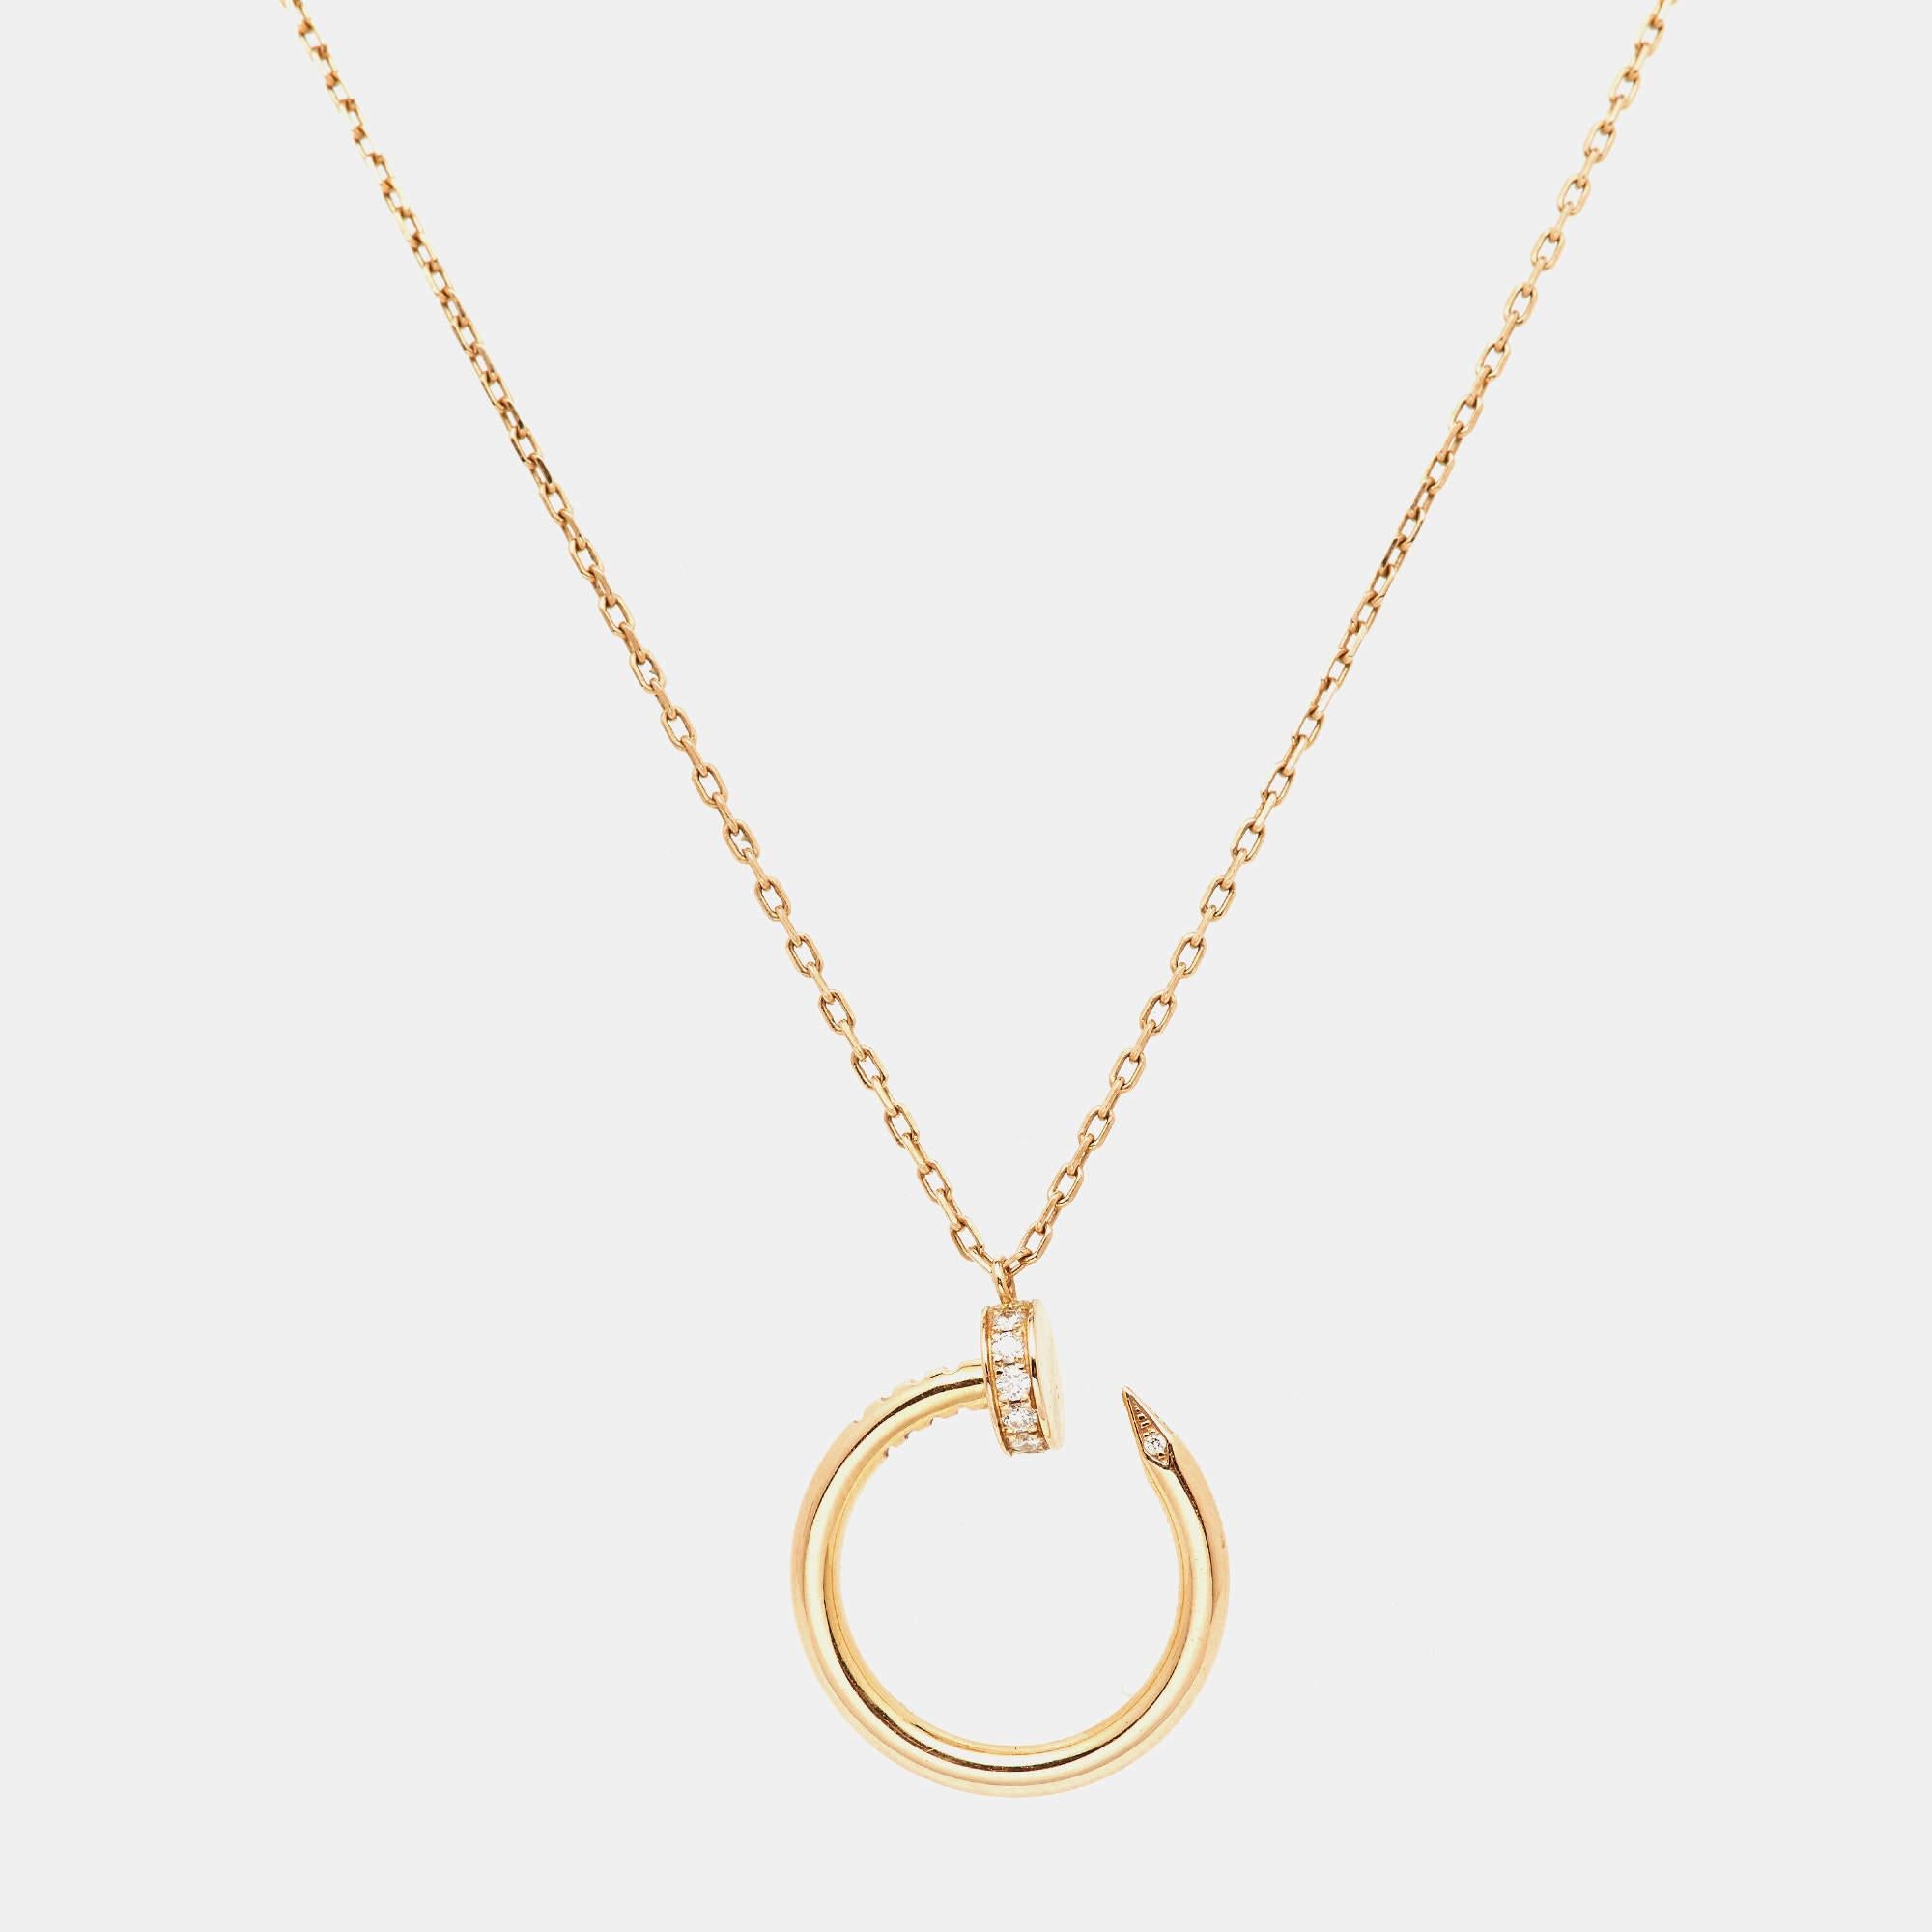 The Juste Un Clou collection from Cartier is all about making ordinary objects into exquisite jewelry pieces, and it would be fair to say that this piece is beyond precious. It is a creation that proudly represents the expertise and talent of the